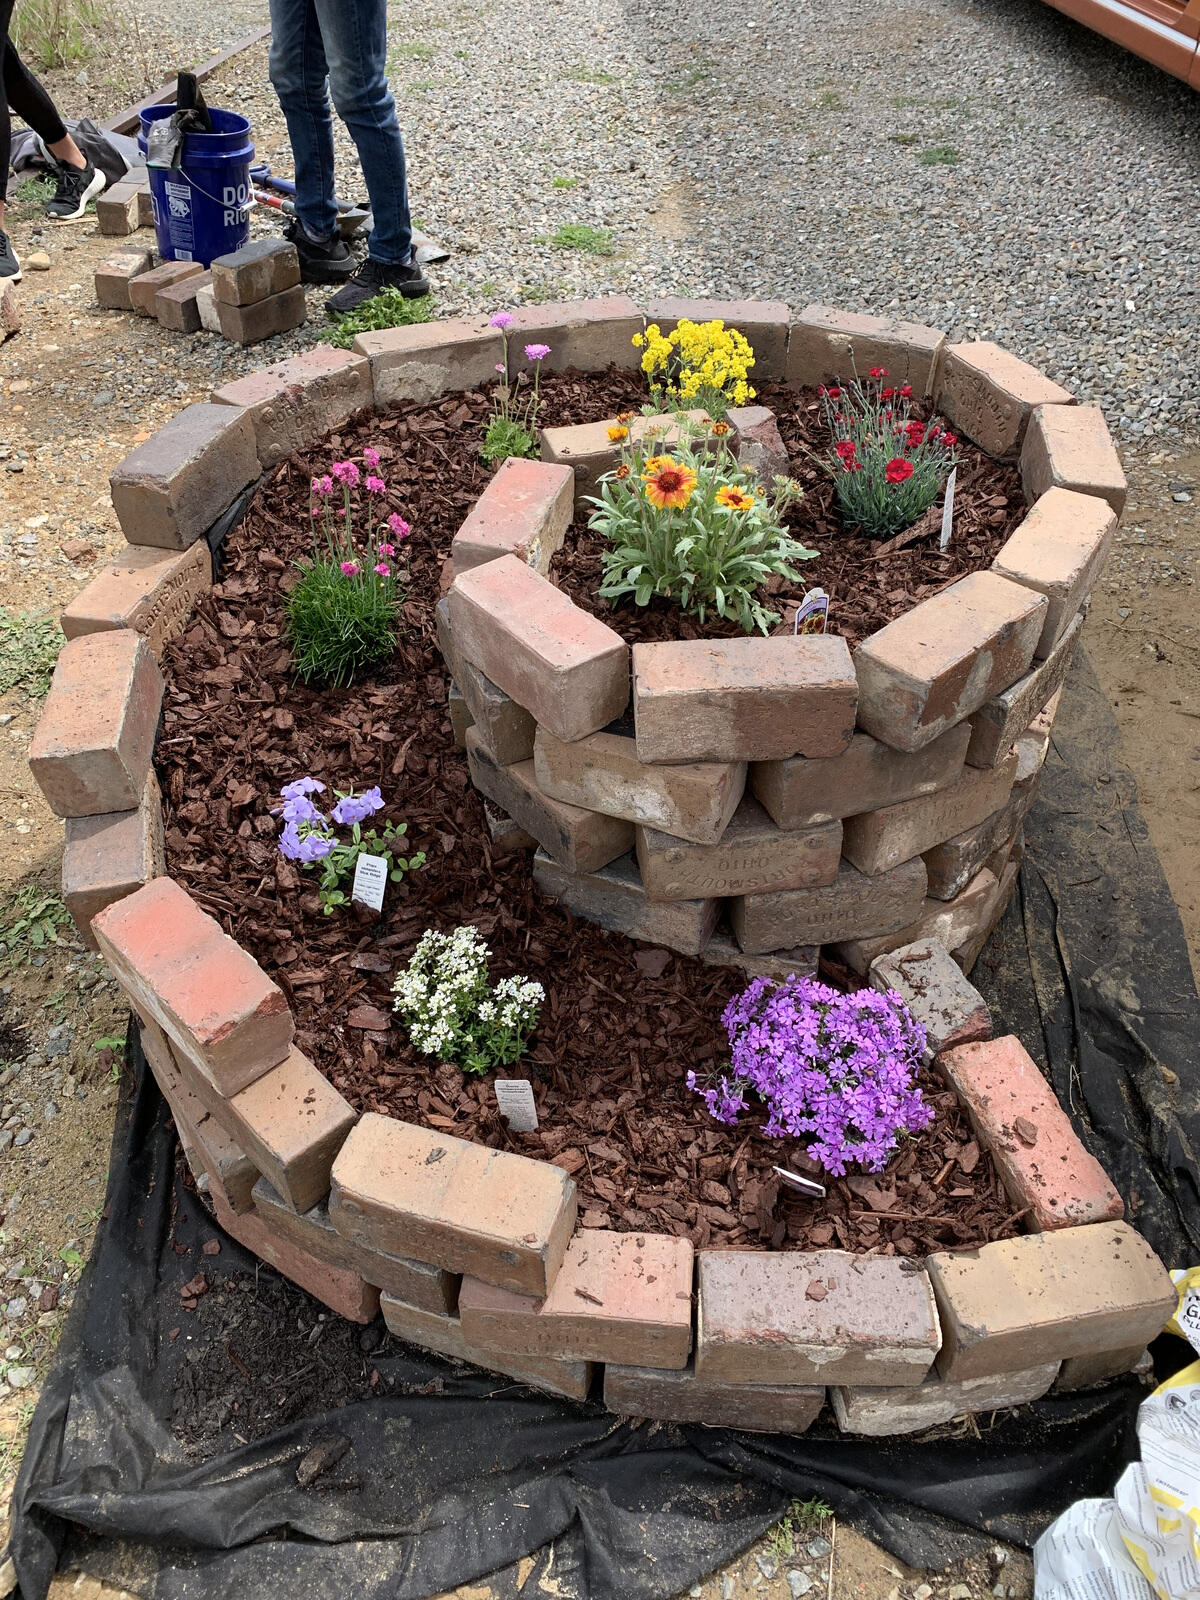 A spiral shaped planter made out of bricks with multicolored flowers going up along the spiral